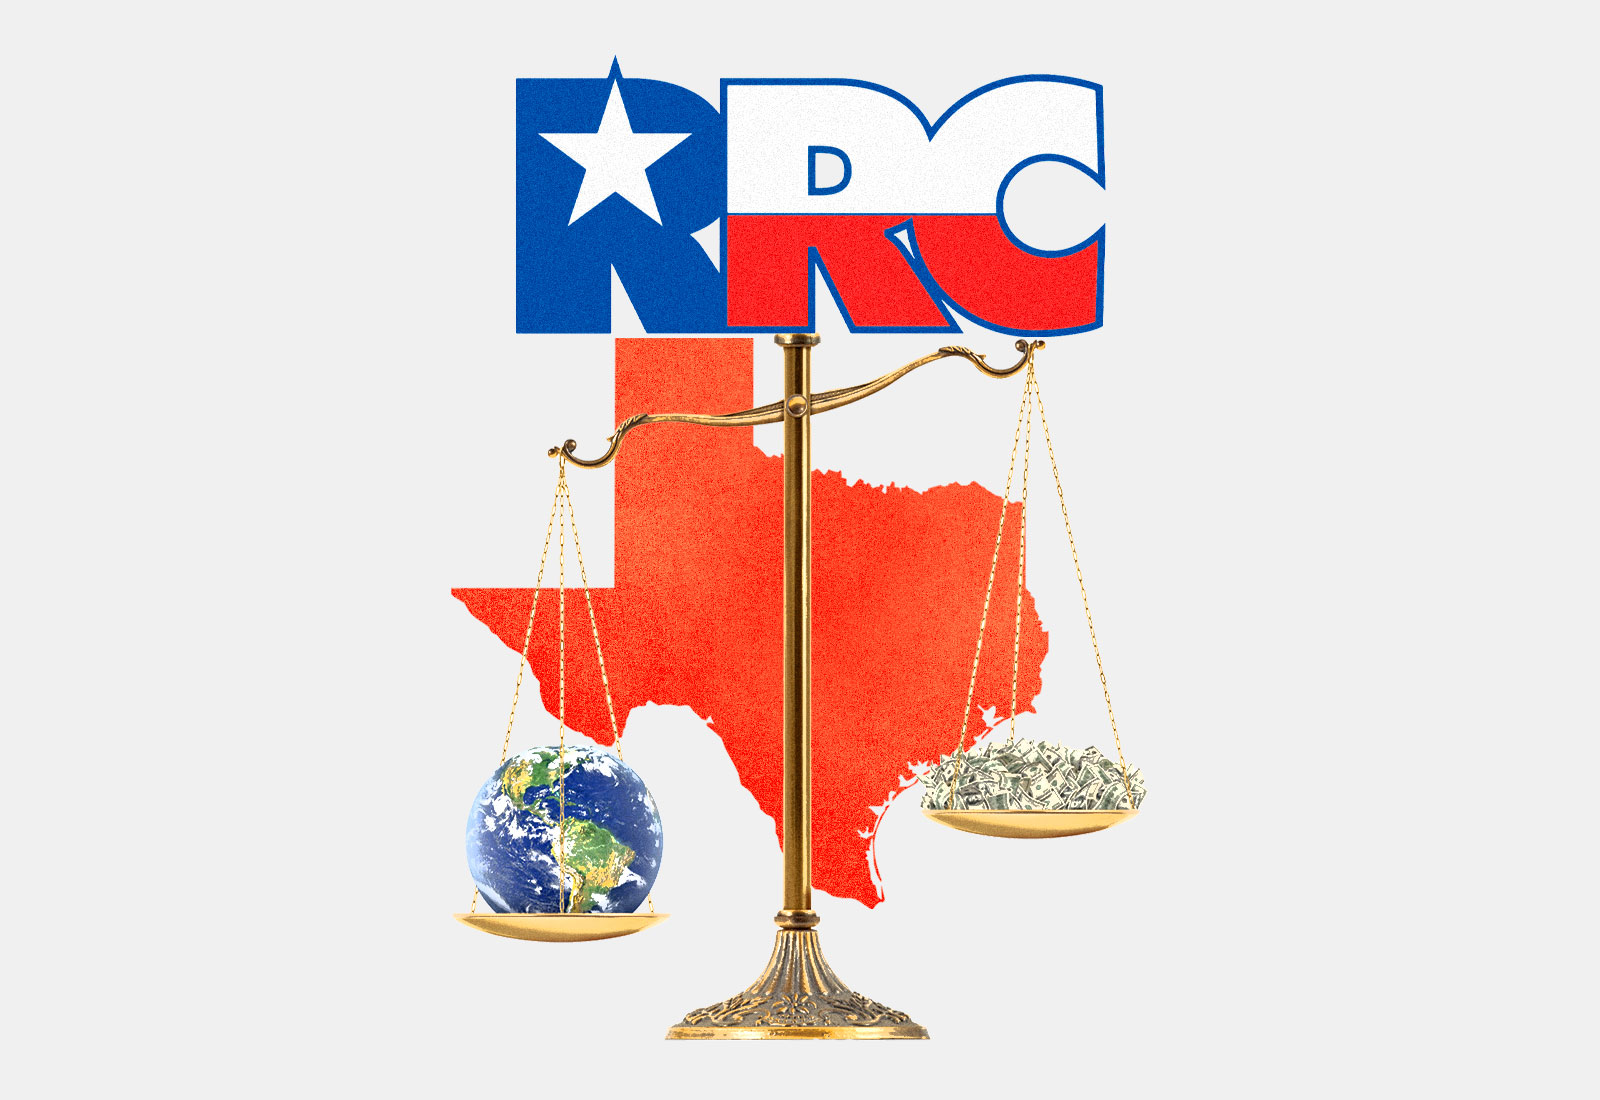 Texas Railroad Commission logo on top of scales with Earth and money on each side, Texas in background